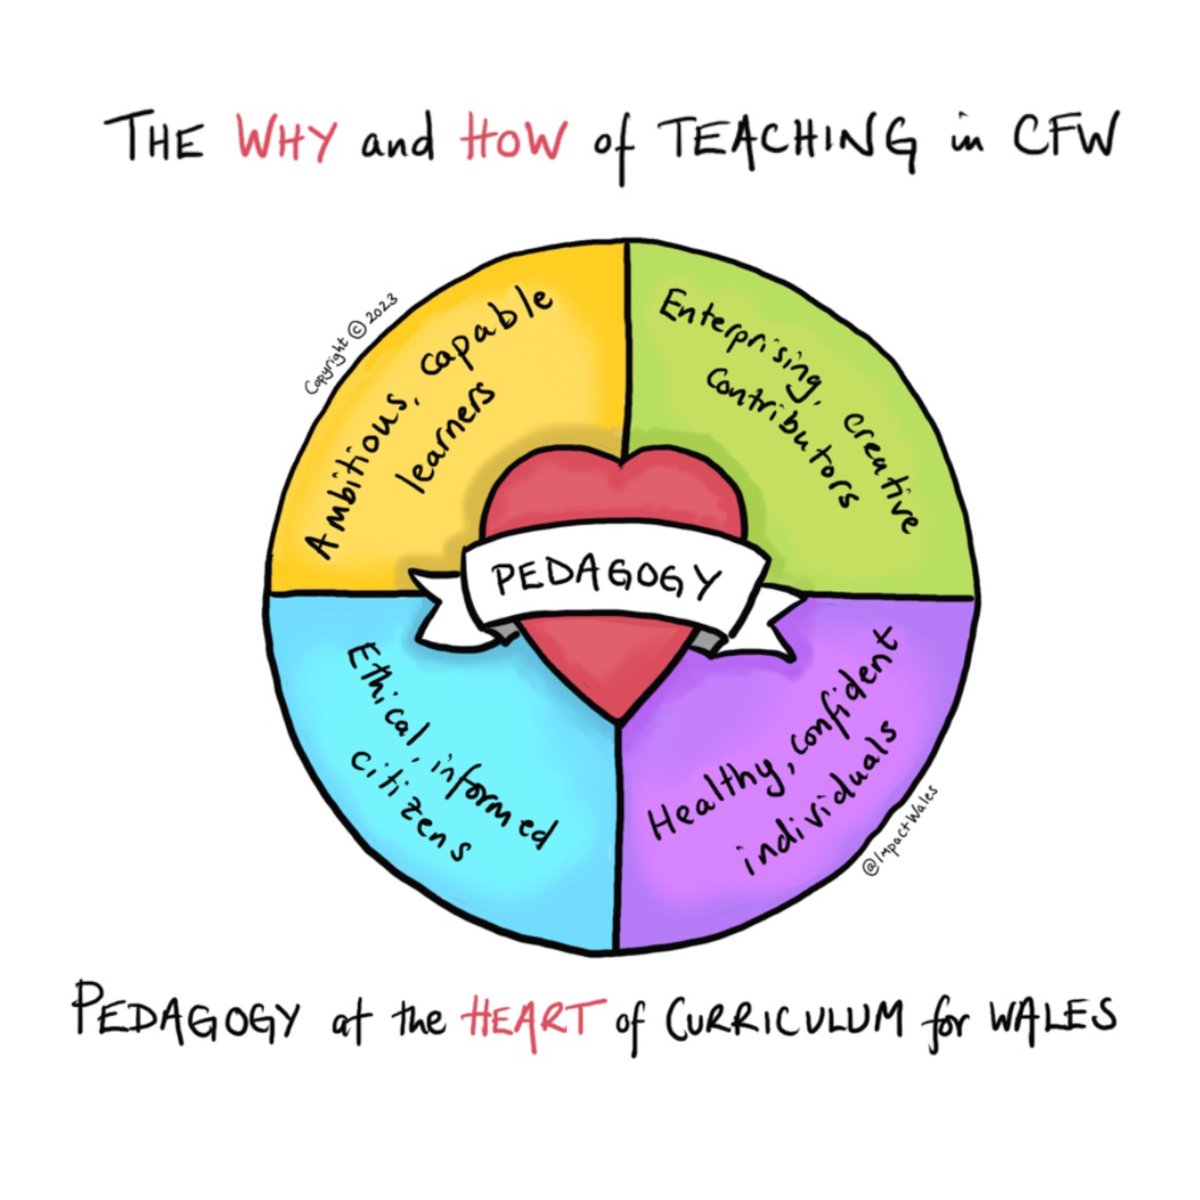 Want to improve the quality of your teaching? Buy our 'Pedagogy at the Heart of CfW' professional learning pack. A step by step guide for which brings together WG guidance, the 12 PPs & what research tells us about how learning happens. impact.wales/news/12-pedago…